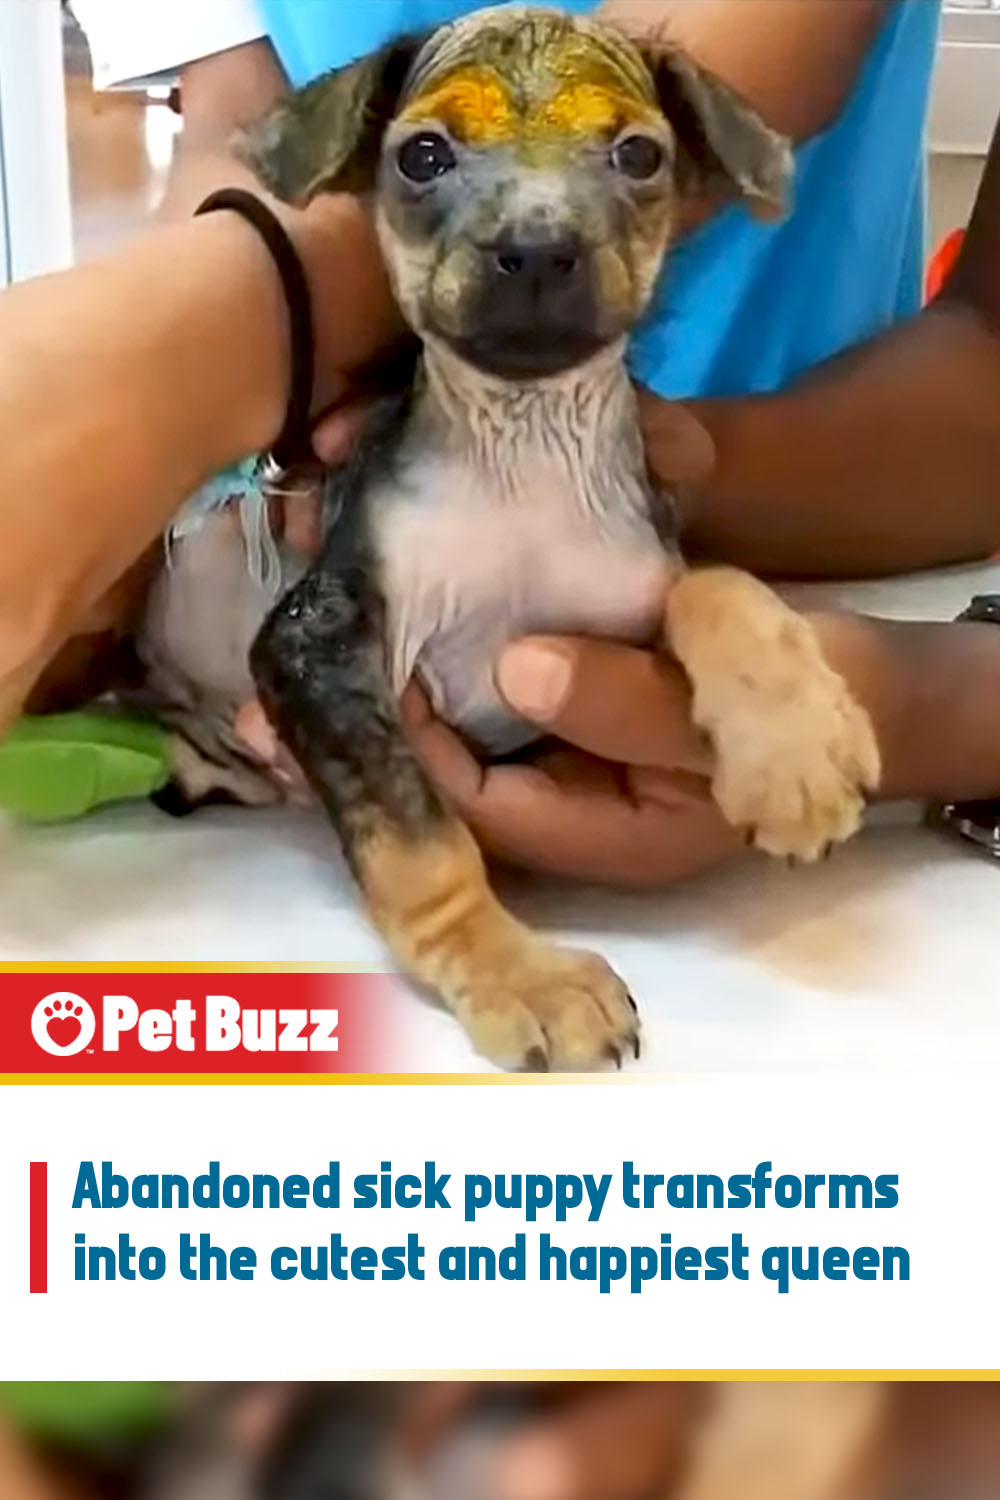 Abandoned sick puppy transforms into the cutest and happiest queen